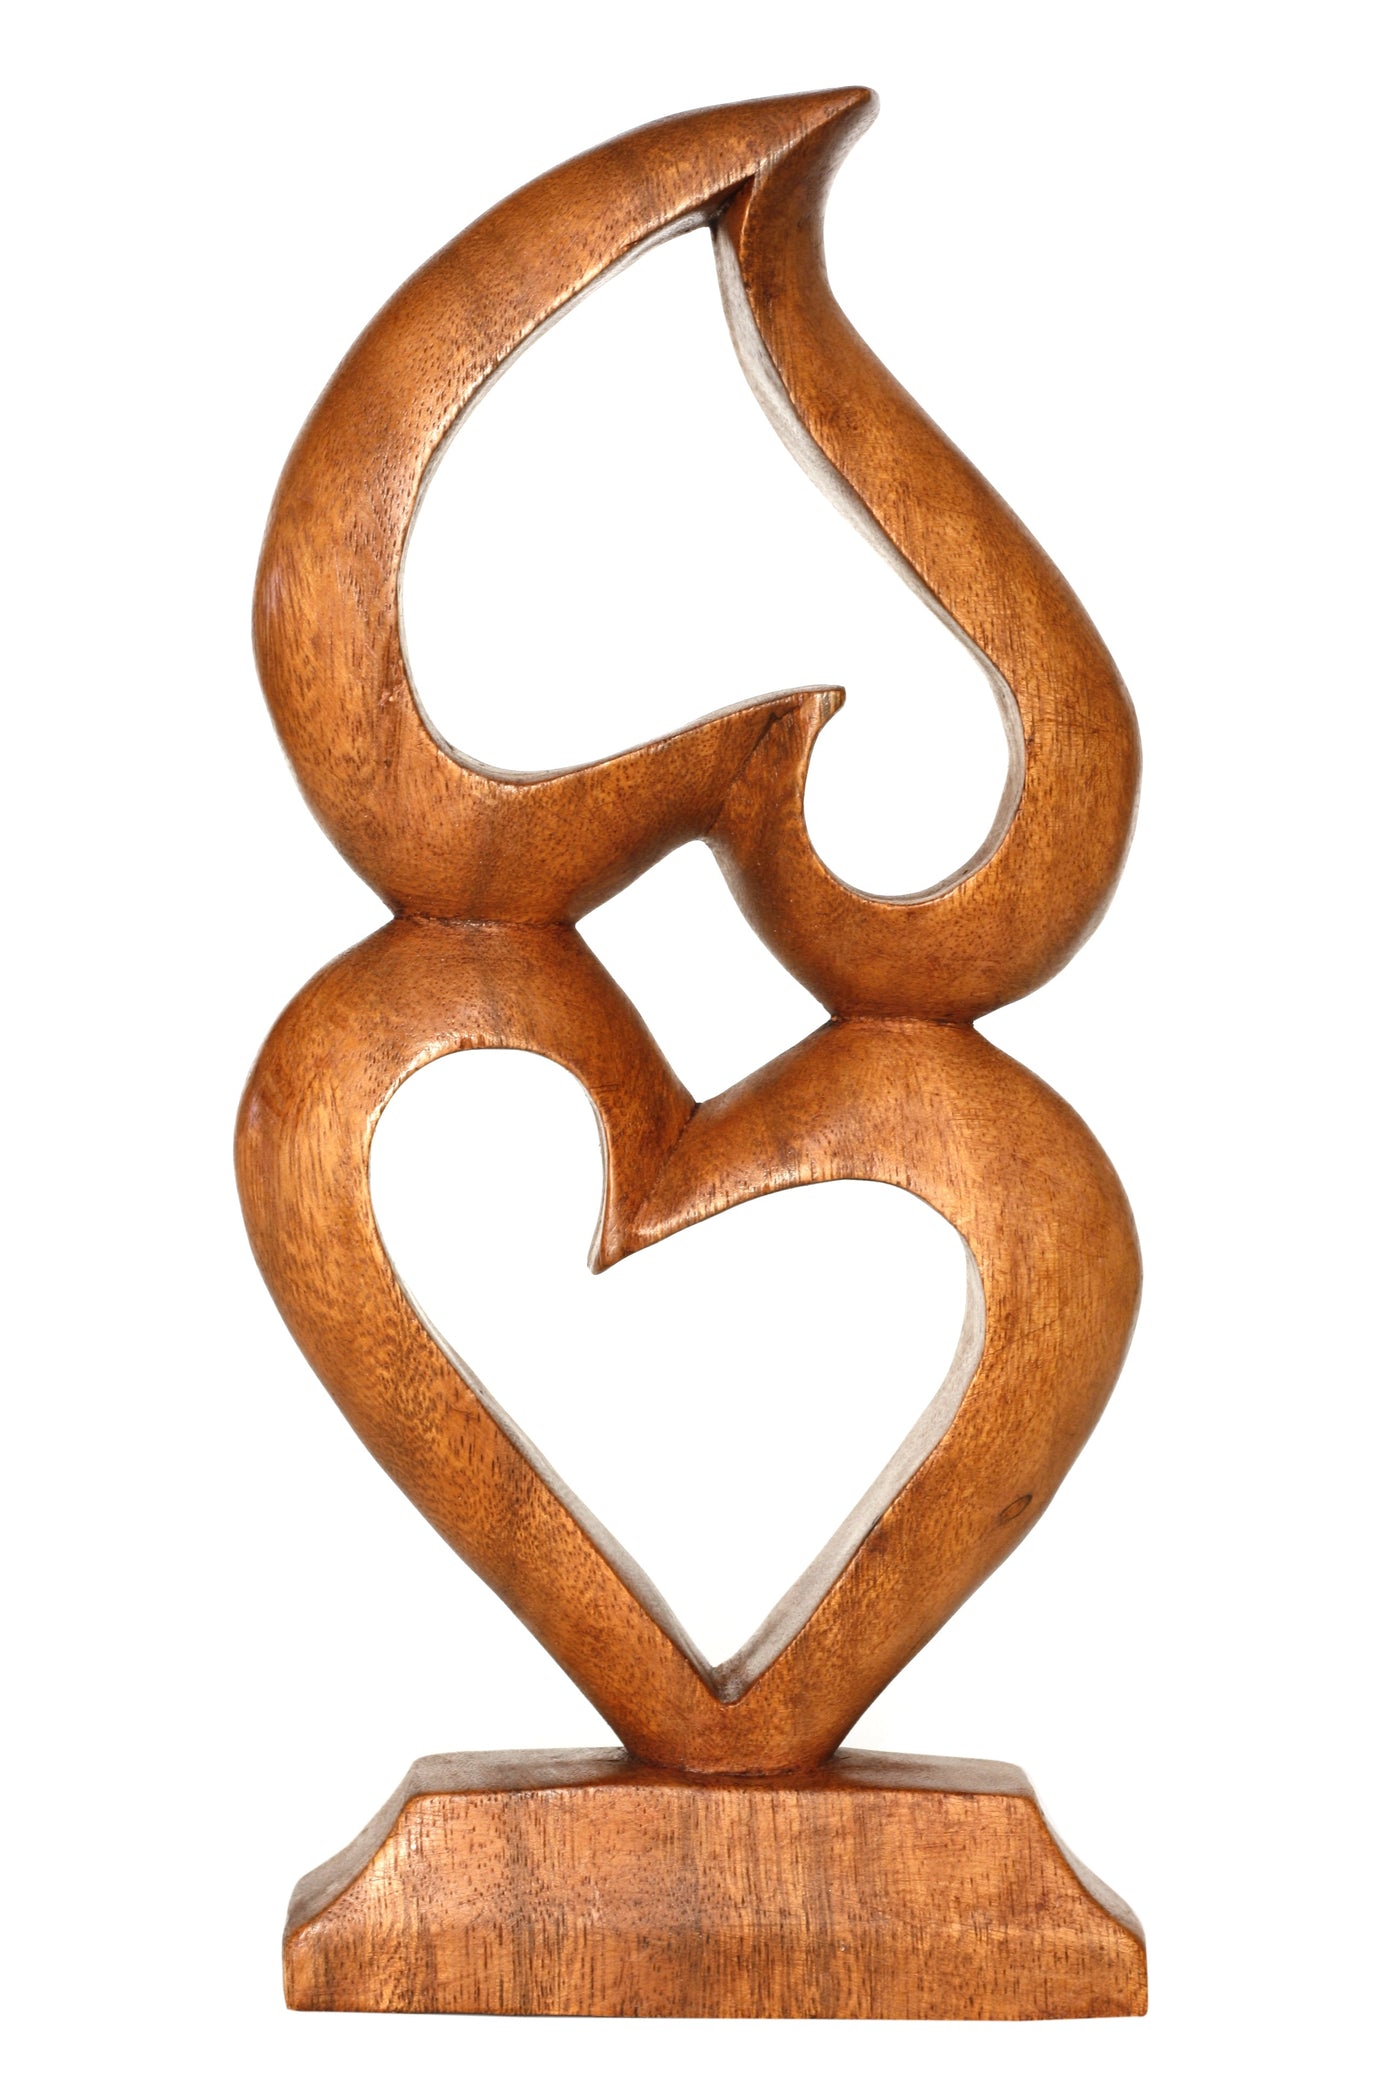 12" Wooden Handmade Abstract Sculpture Statue Handcrafted "Two Hearts, One Love" Gift Art Decorative Home Decor Figurine Accent Decoration Artwork Hand Carved